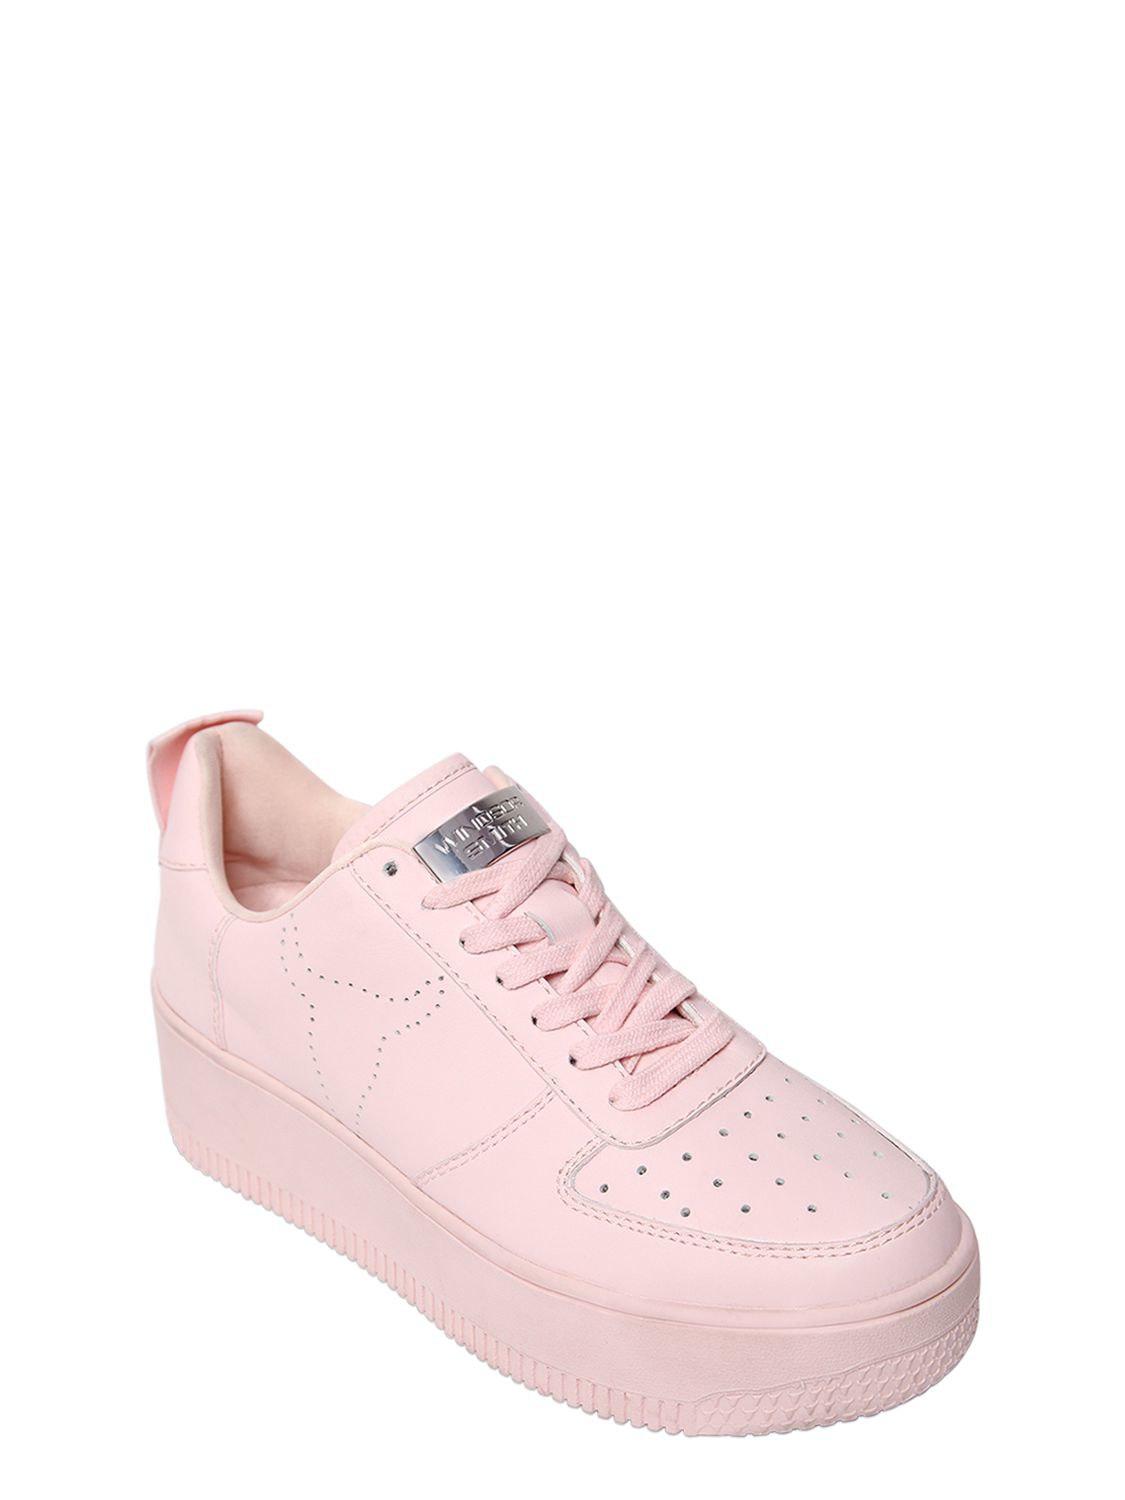 windsor smith pink sneakers